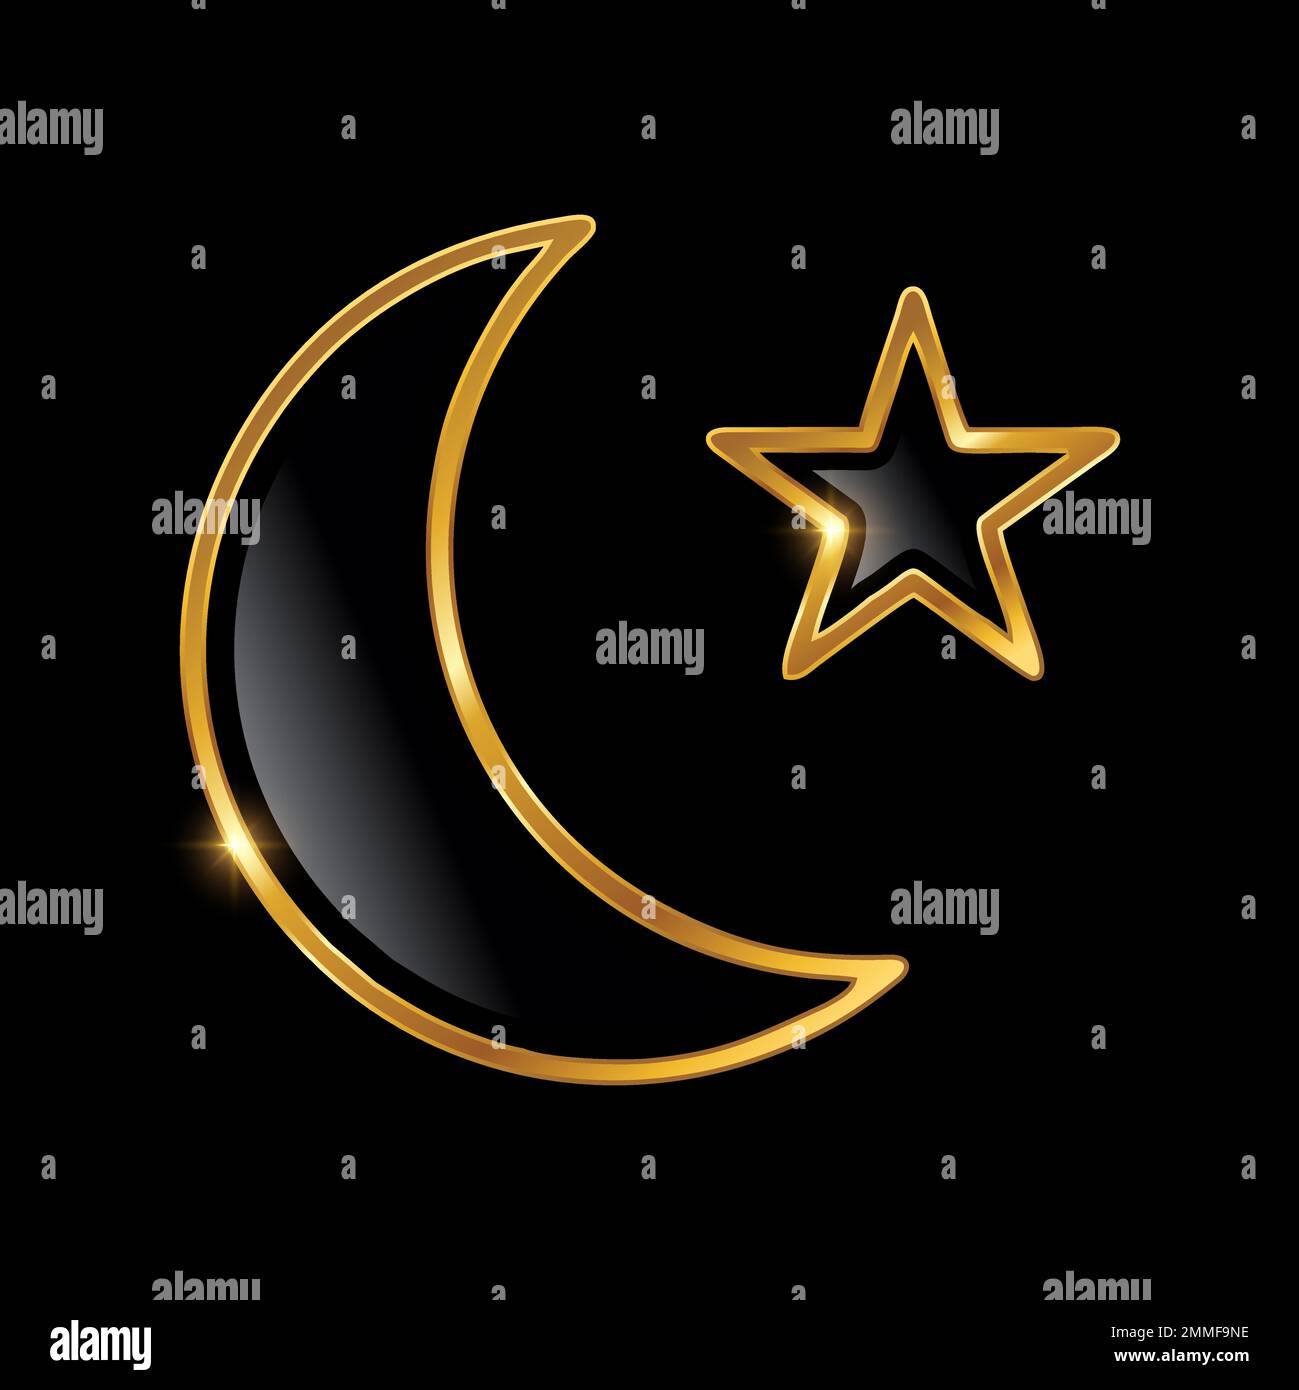 Golden Luxury Crescent Logo Sign vector Illustration in black background with gold shine effect Stock Vector